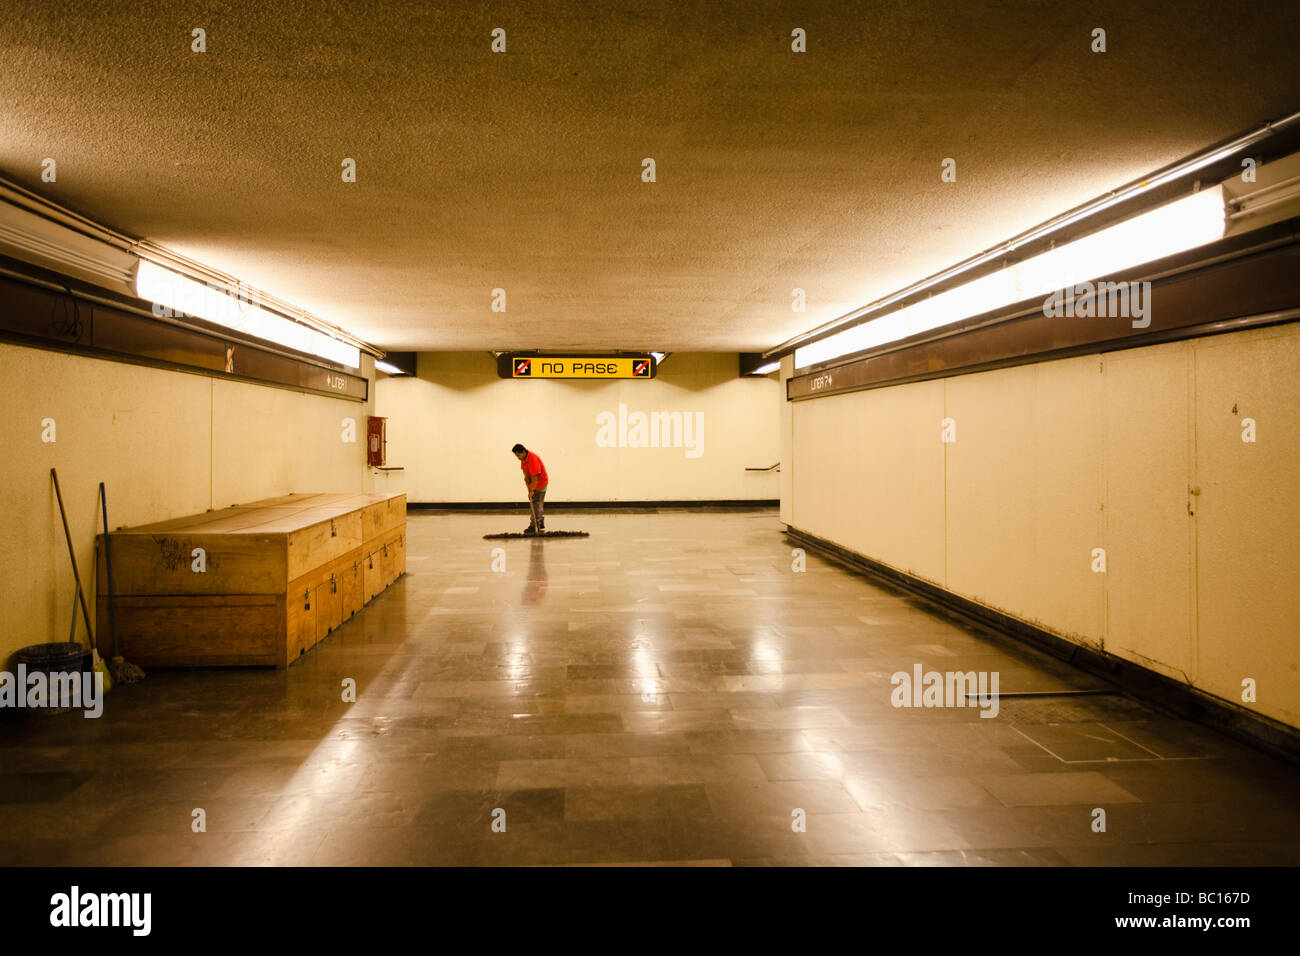 A worker cleans the floor in an empty metro (subway) station during the swine flu epidemic in Mexico City, DF, Mexico. Stock Photo